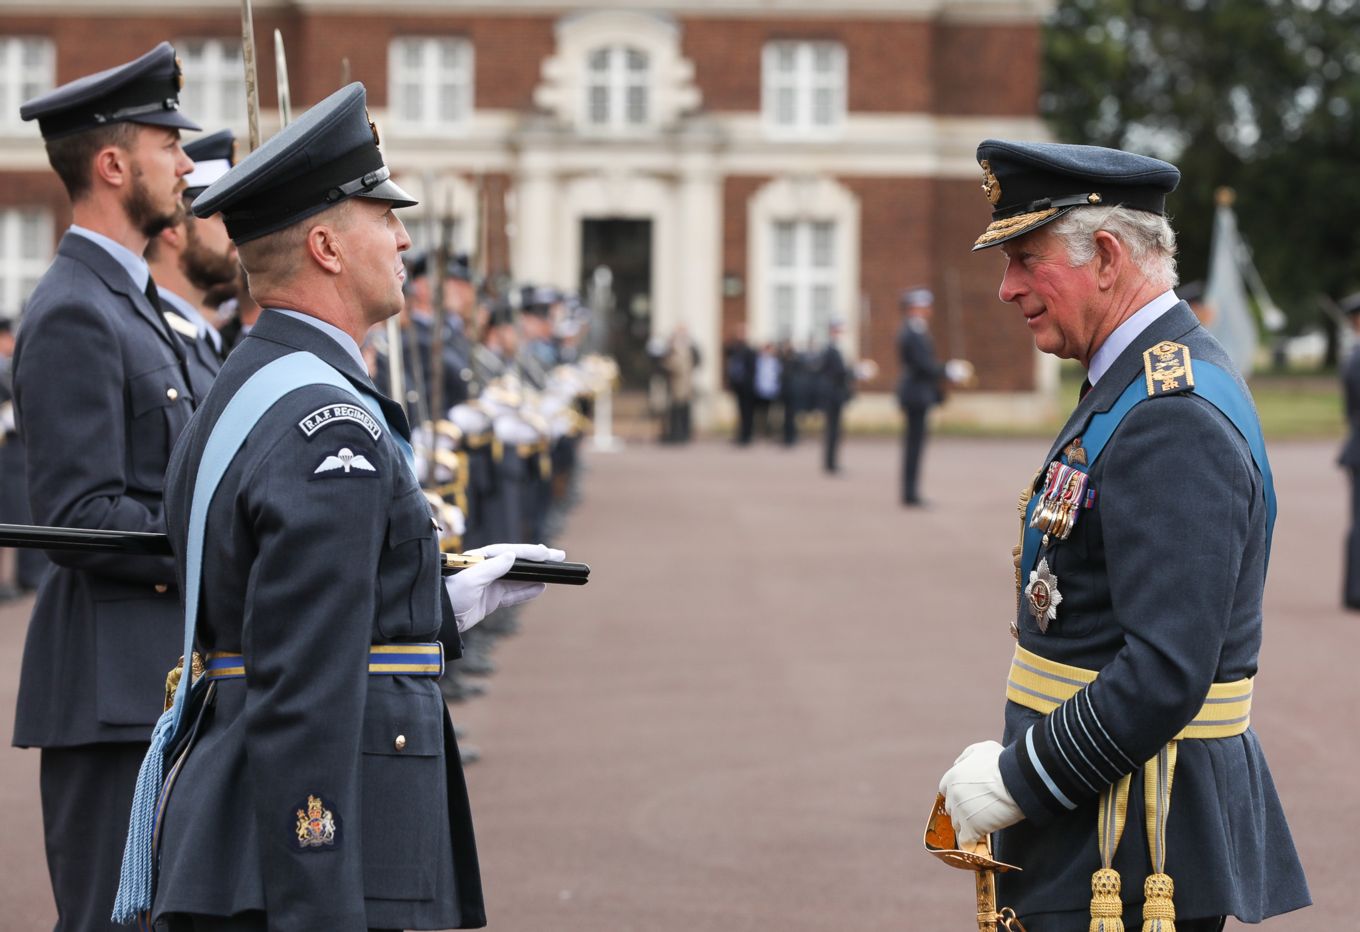 Image shows HRH, The Prince of Wales meeting Graduating Officers with the College Warrant Officer